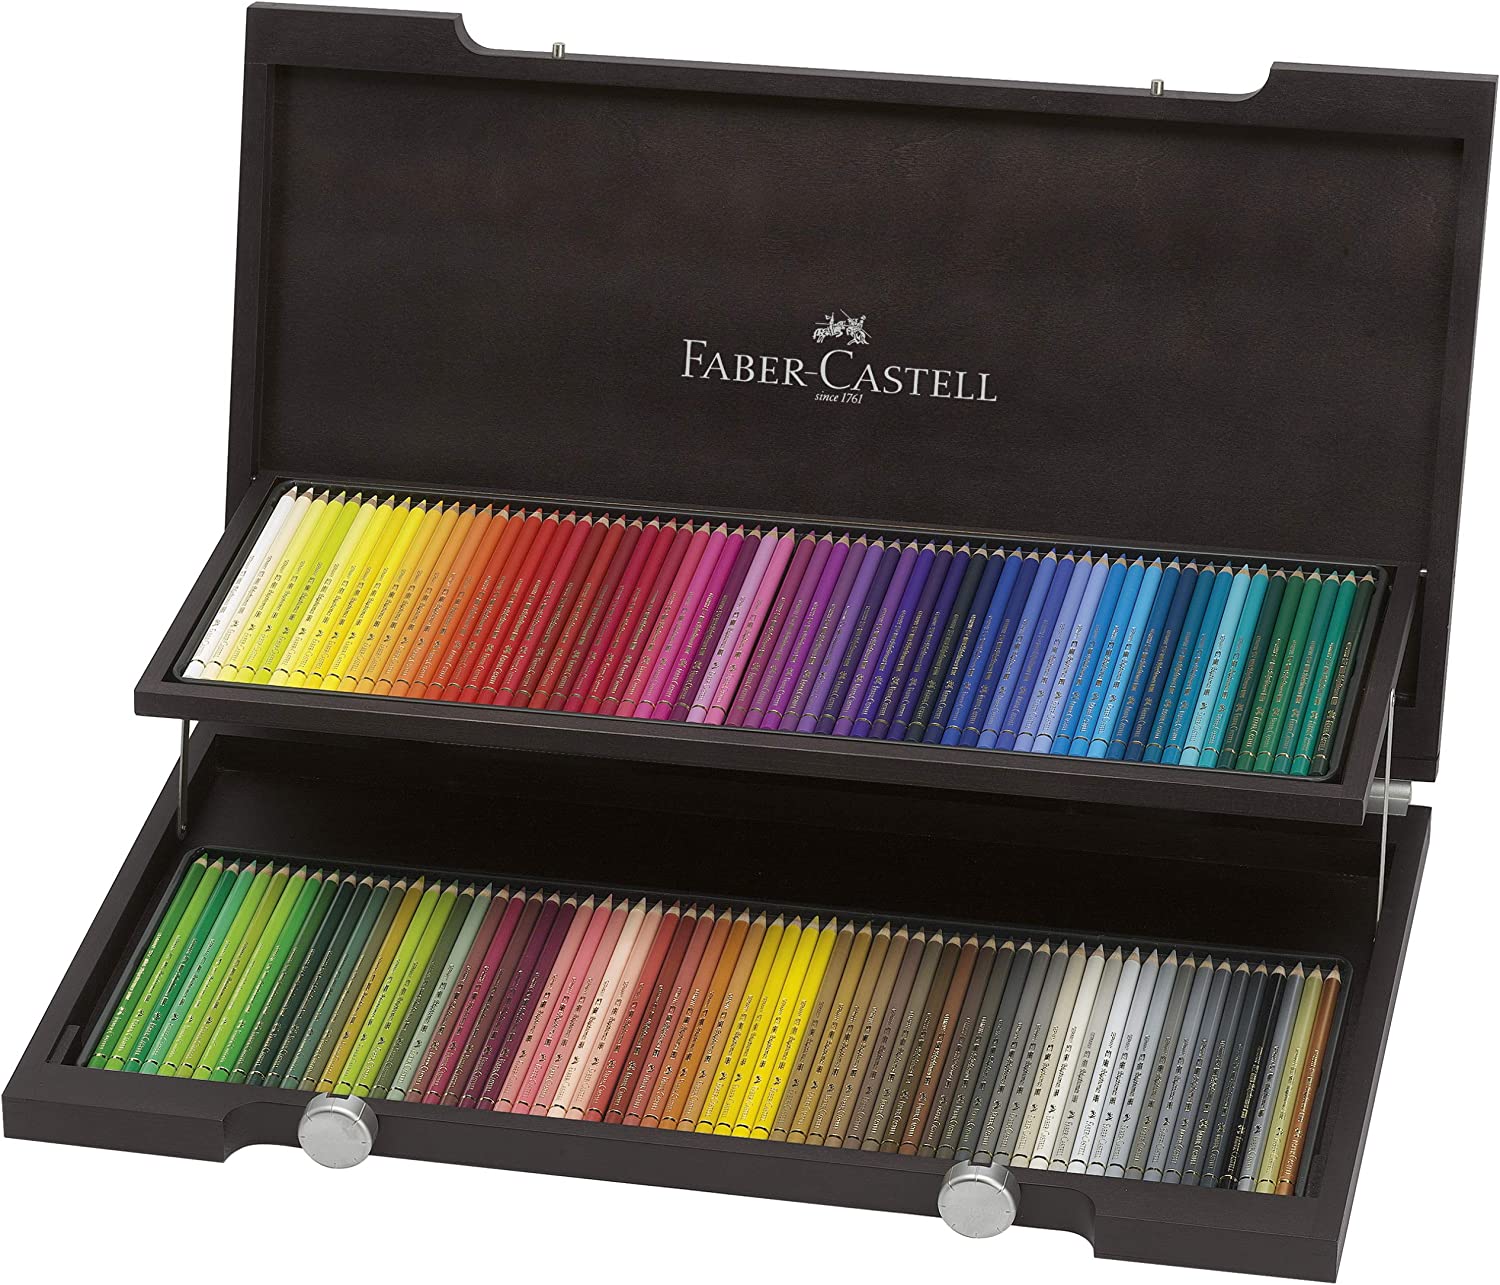 Faber-Castell is innovating with NFTs and products in the metaverse